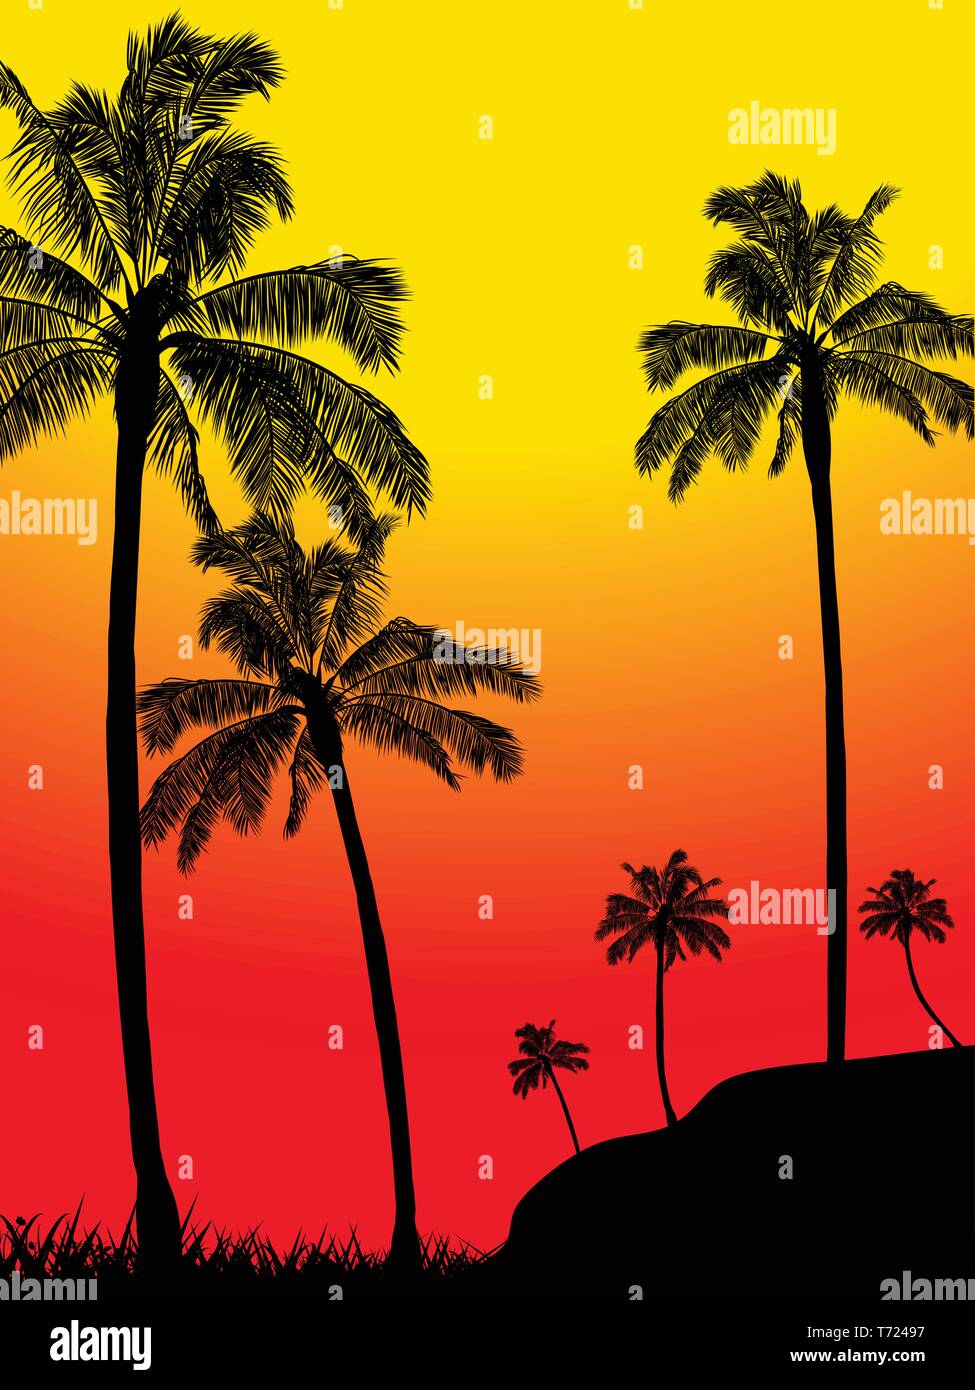 Summer Tropical Palm Trees Forest Silhouette Over Yellow and Red Background Stock Vector